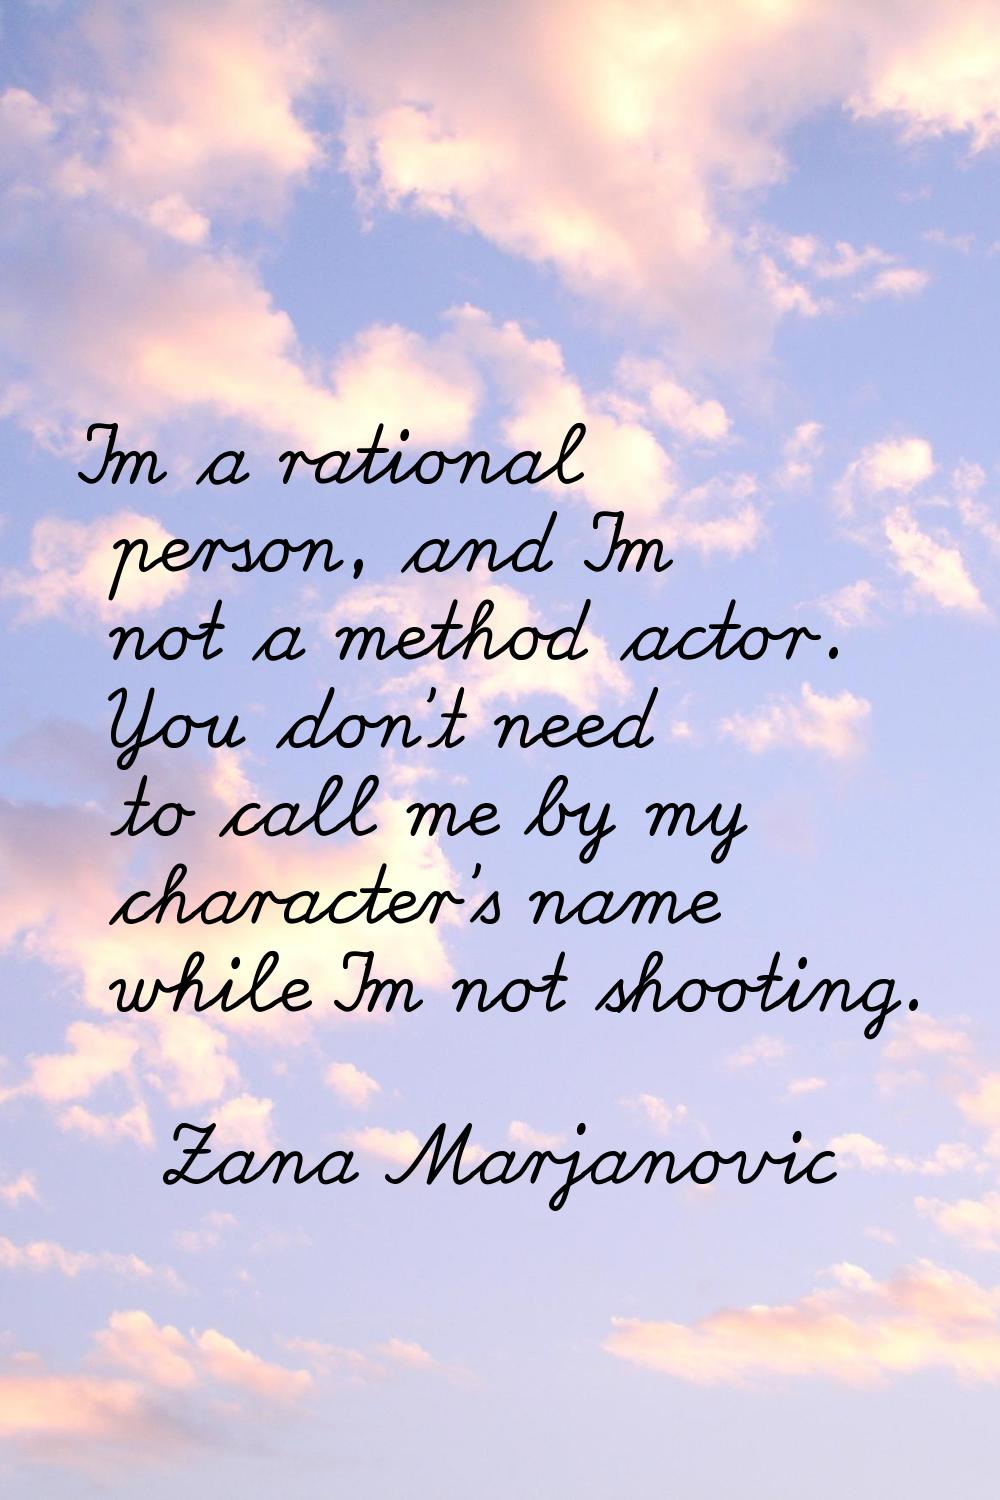 I'm a rational person, and I'm not a method actor. You don't need to call me by my character's name